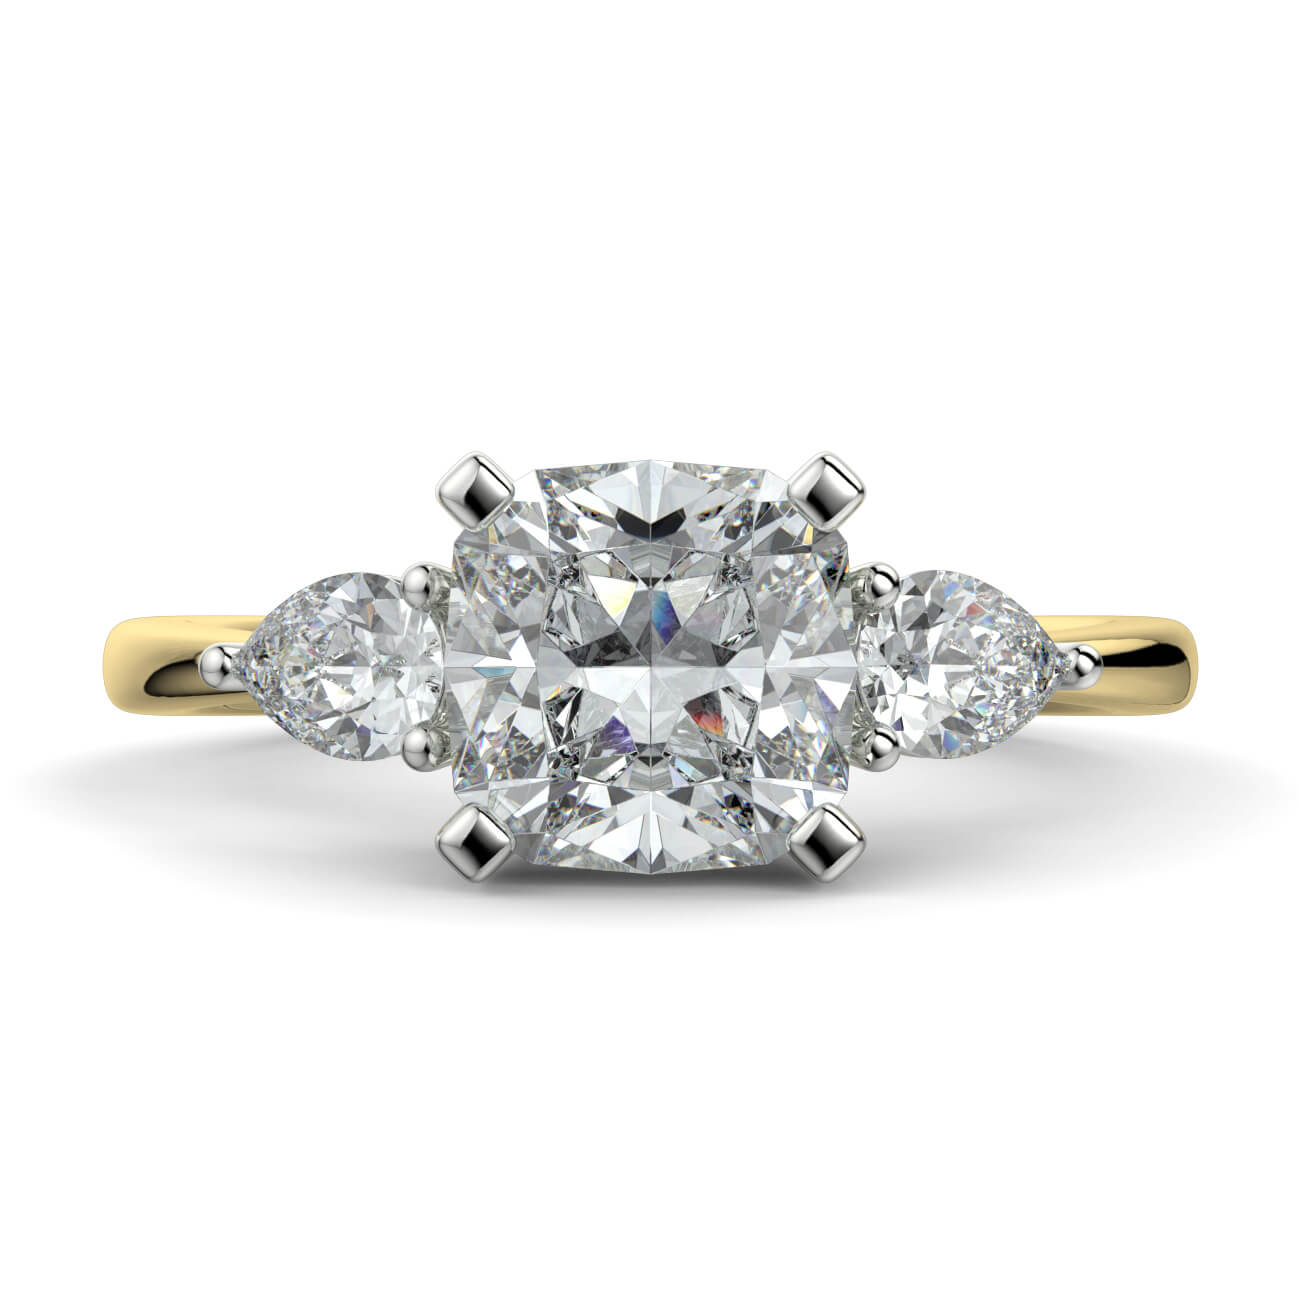 Cushion Cut Diamond Ring With Pear Shape Side Diamonds In Yellow and White Gold – Australian Diamond Network